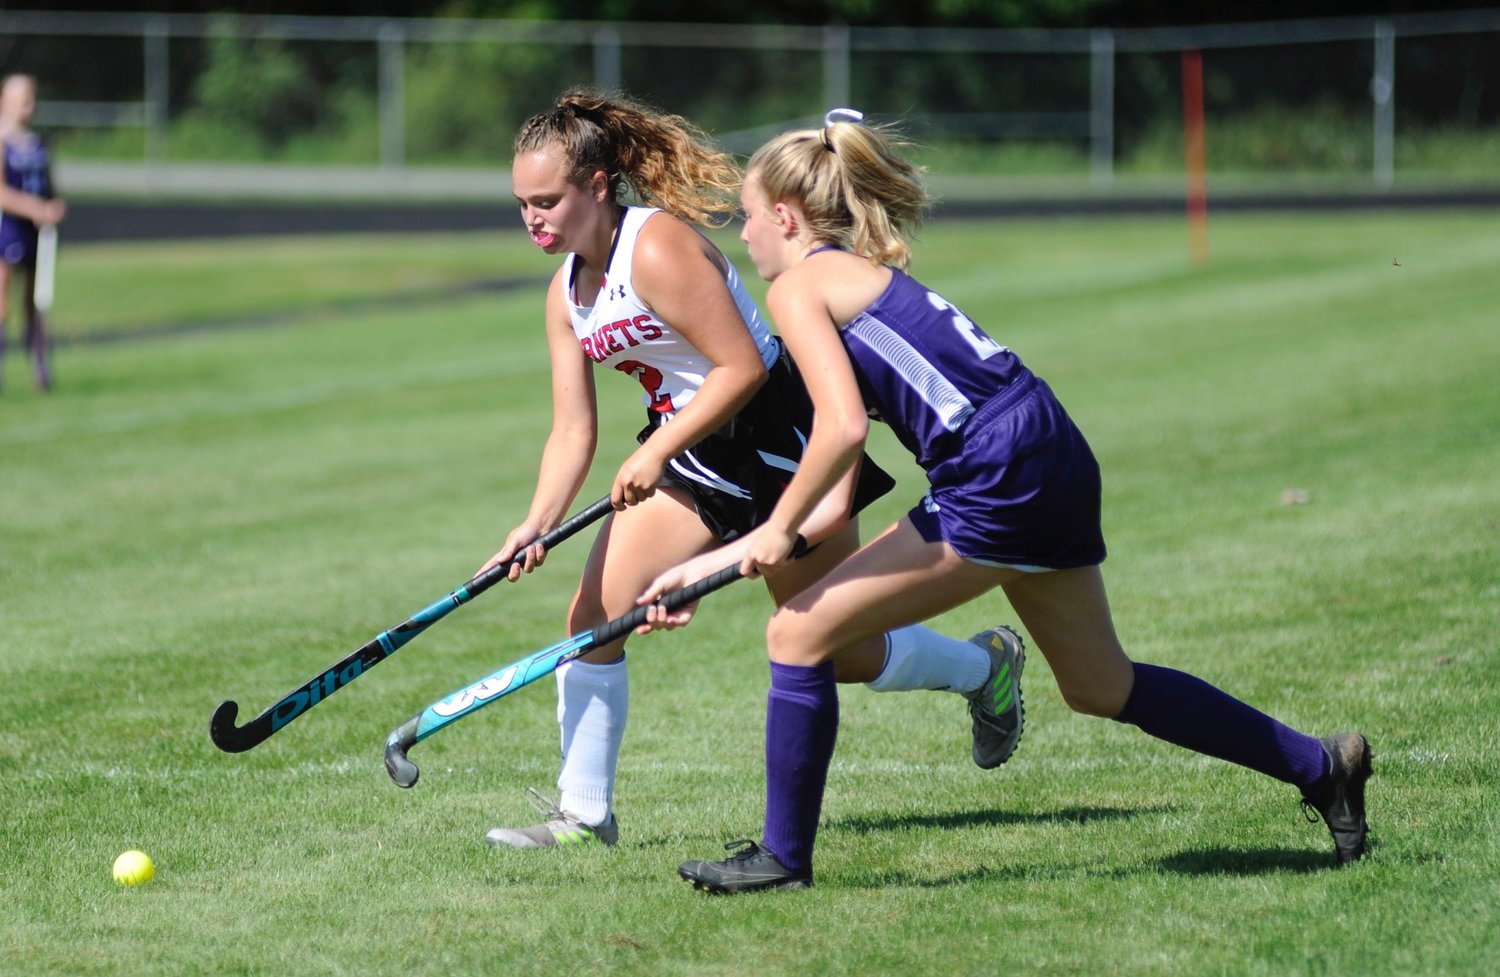 In contention. Honesdale’s Jillian Hoey and Wallenpaupack’s Aulbrey Folk vie for possession.